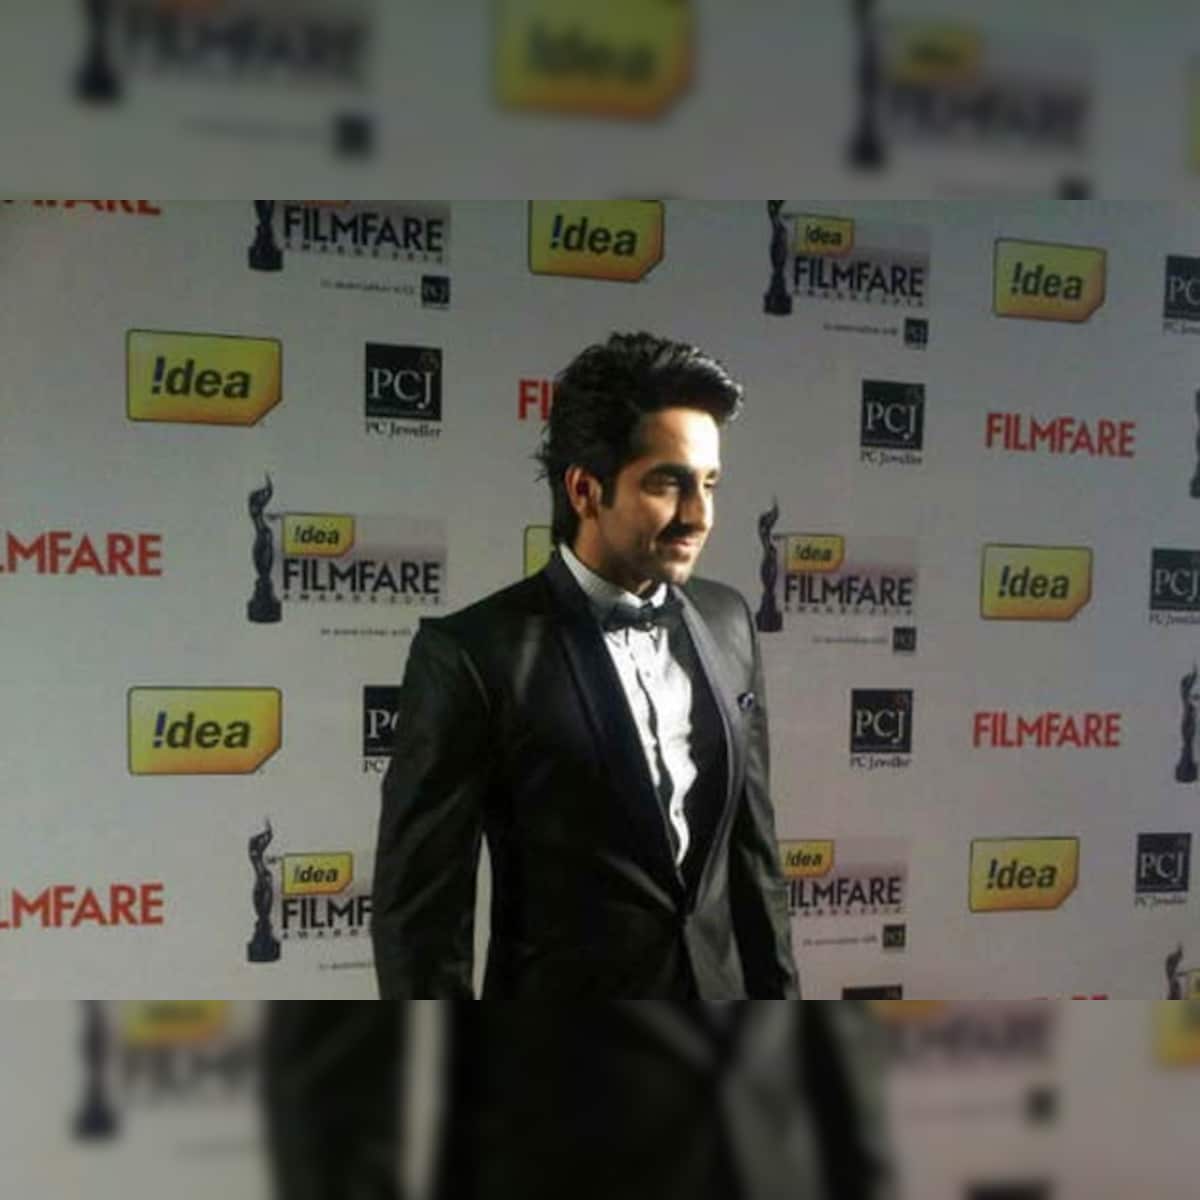 Filmfare Awards: All the action from the awards